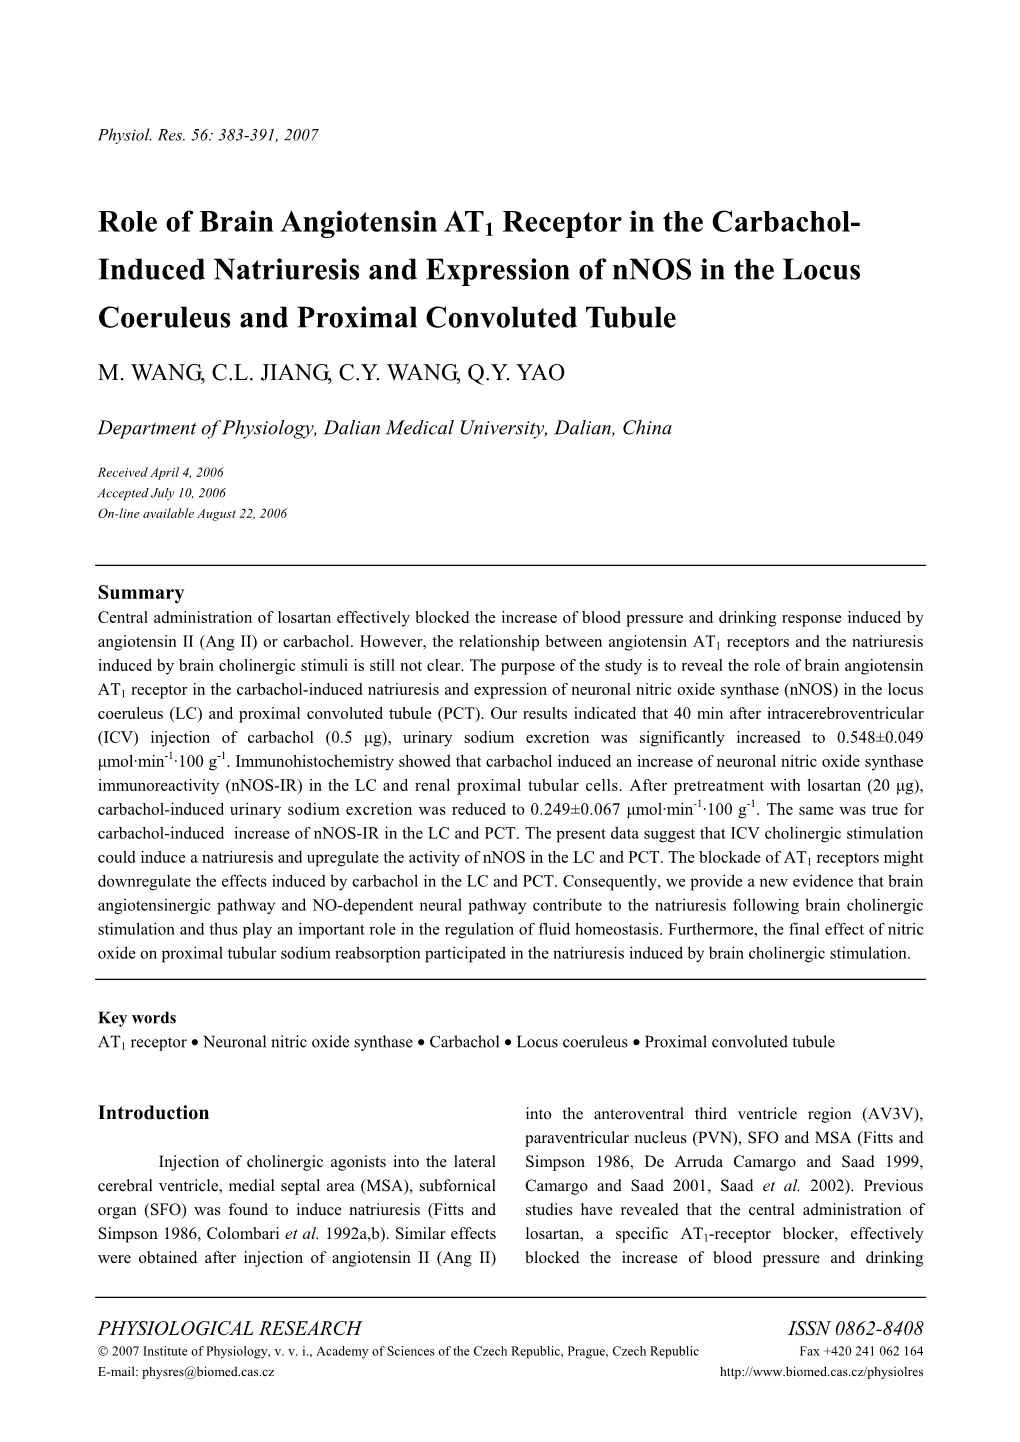 Role of Brain Angiotensin AT1 Receptor in the Carbachol- Induced Natriuresis and Expression of Nnos in the Locus Coeruleus and Proximal Convoluted Tubule